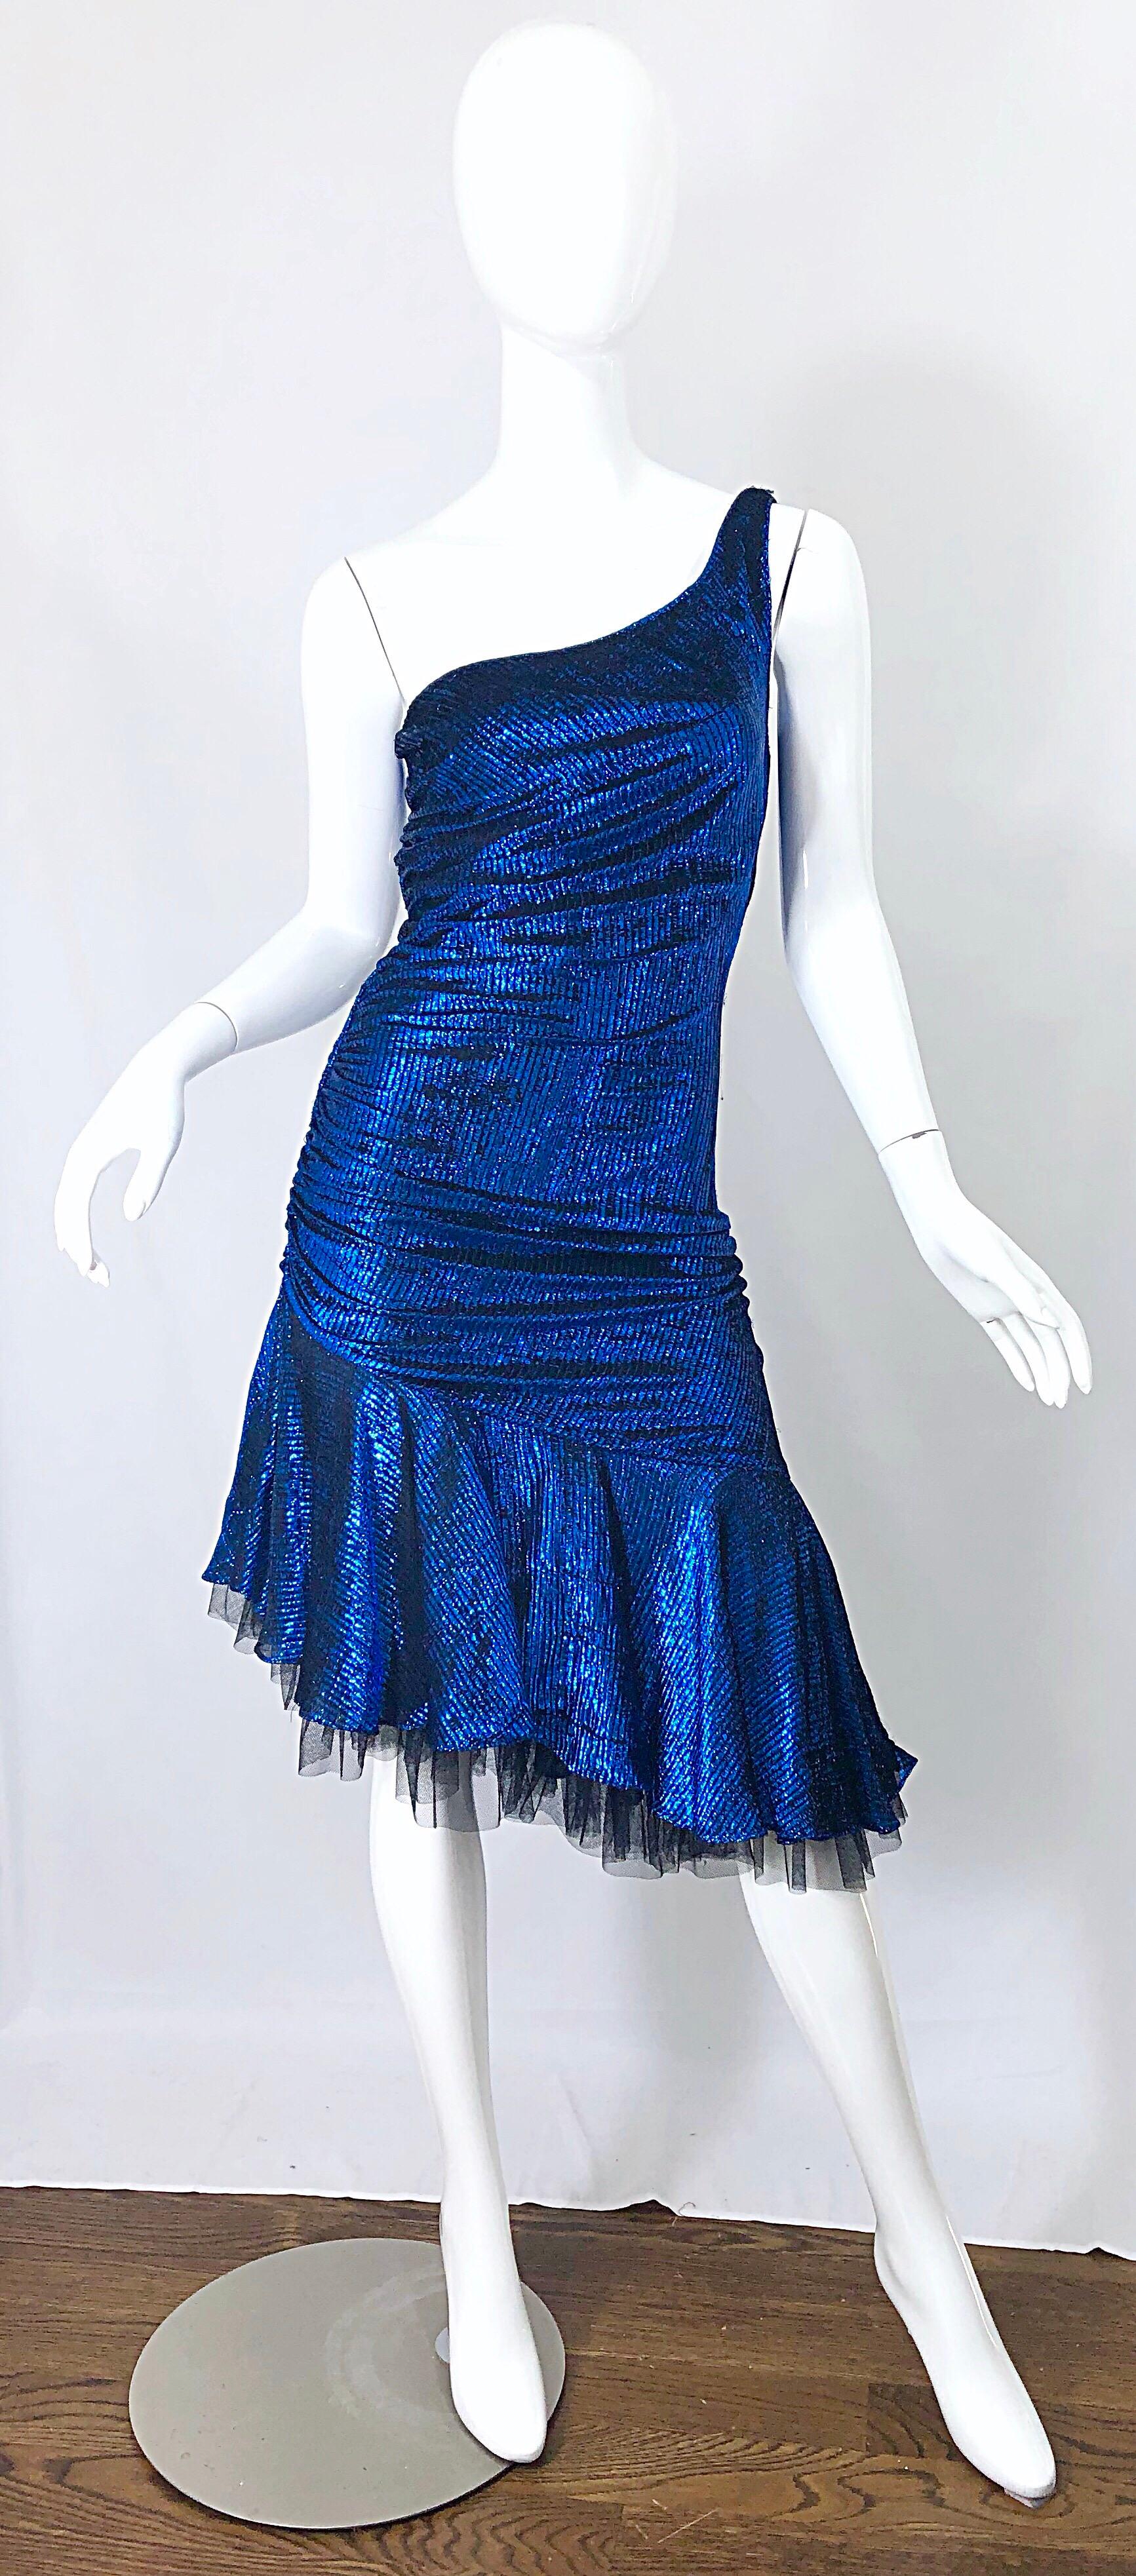 Fabulous 1980s electric blue and black metallic one shoulder asymmetrical hem cocktail dress! Features a fitted body hugging fit, with flattering ruching that covers any 'problem' areas. Black tulle peaks from under the blue skirt. Hidden zipper up